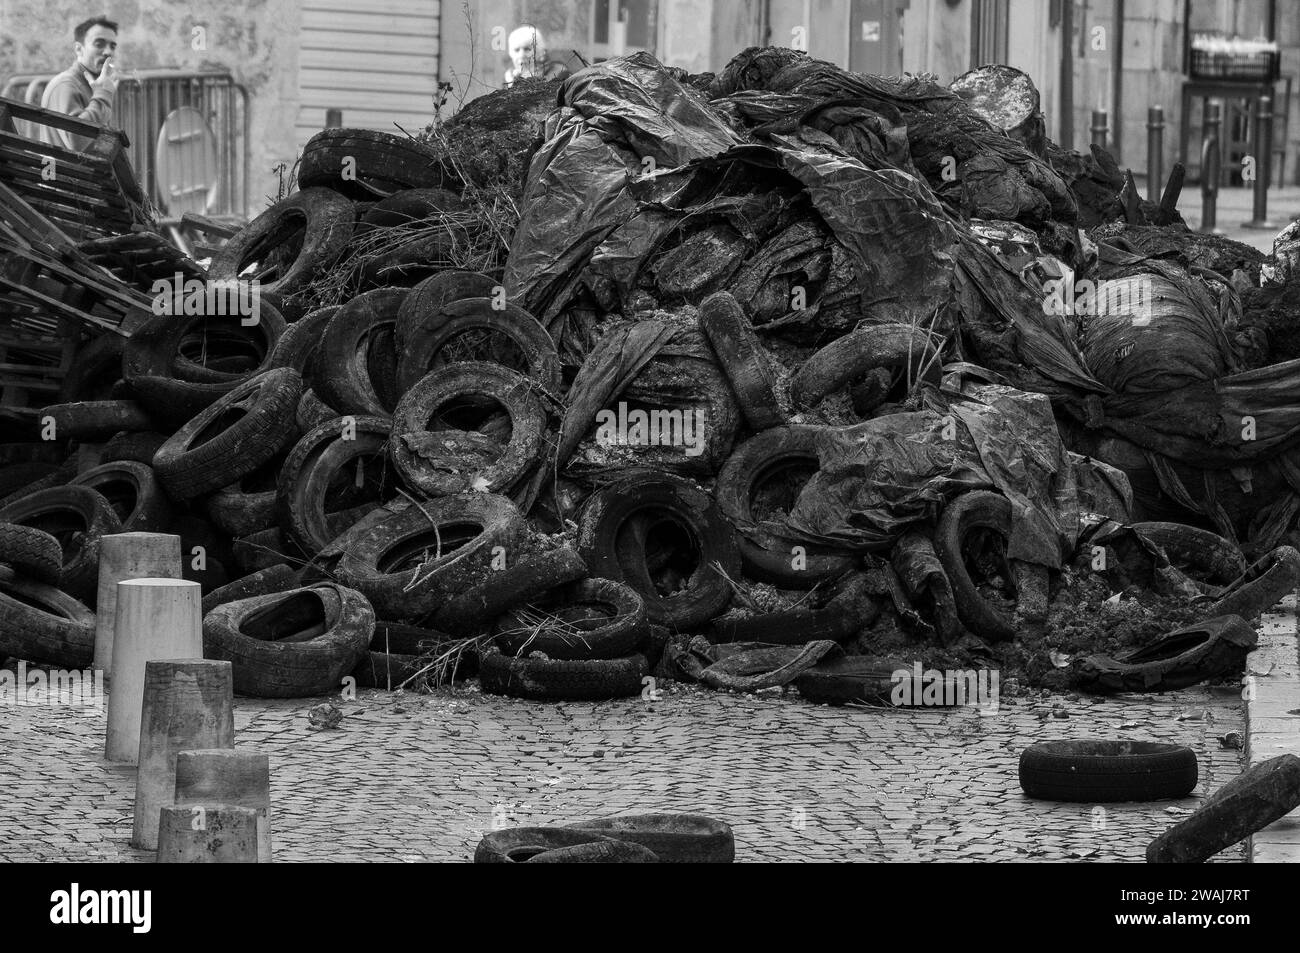 Tyres and manure dumped by farmers as protest,Rue Maréchal Foch, Cahors, Lot department, France Stock Photo